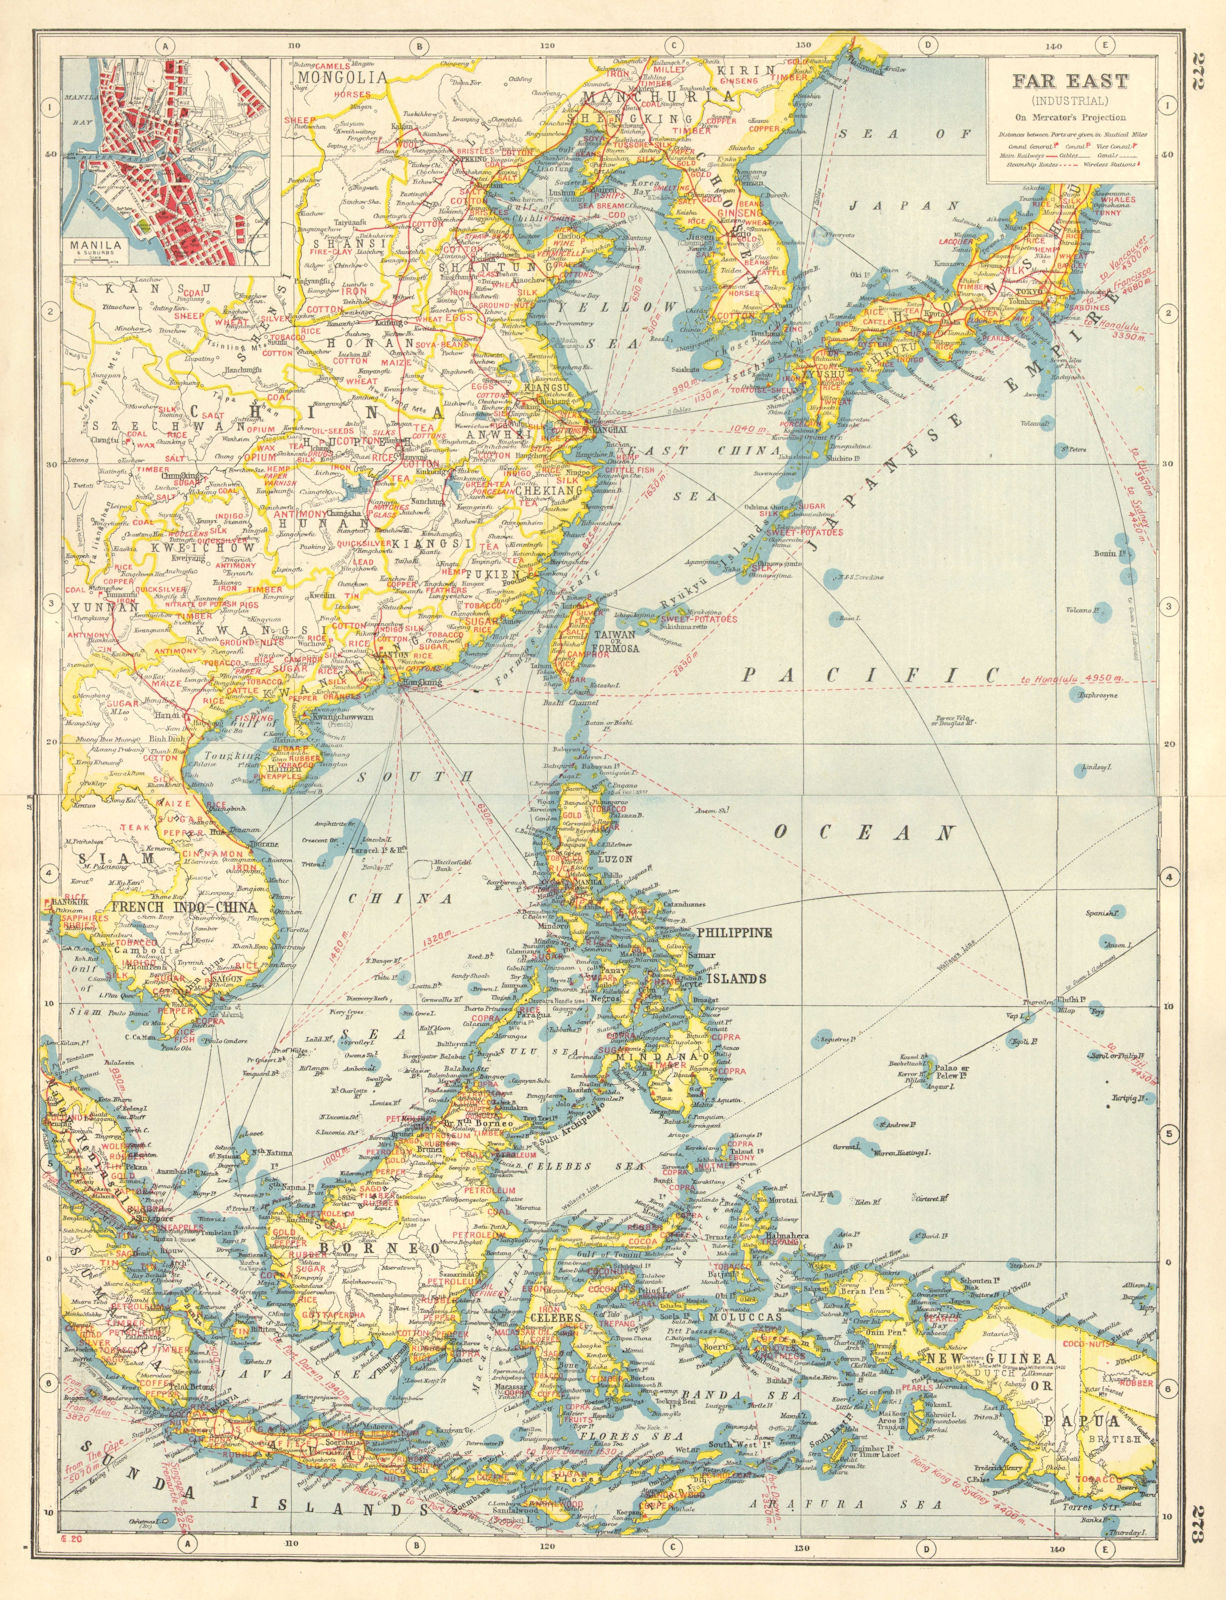 Associate Product EAST ASIA INDUSTRIES. China Korea East Indies Philippines. Manila plan 1920 map